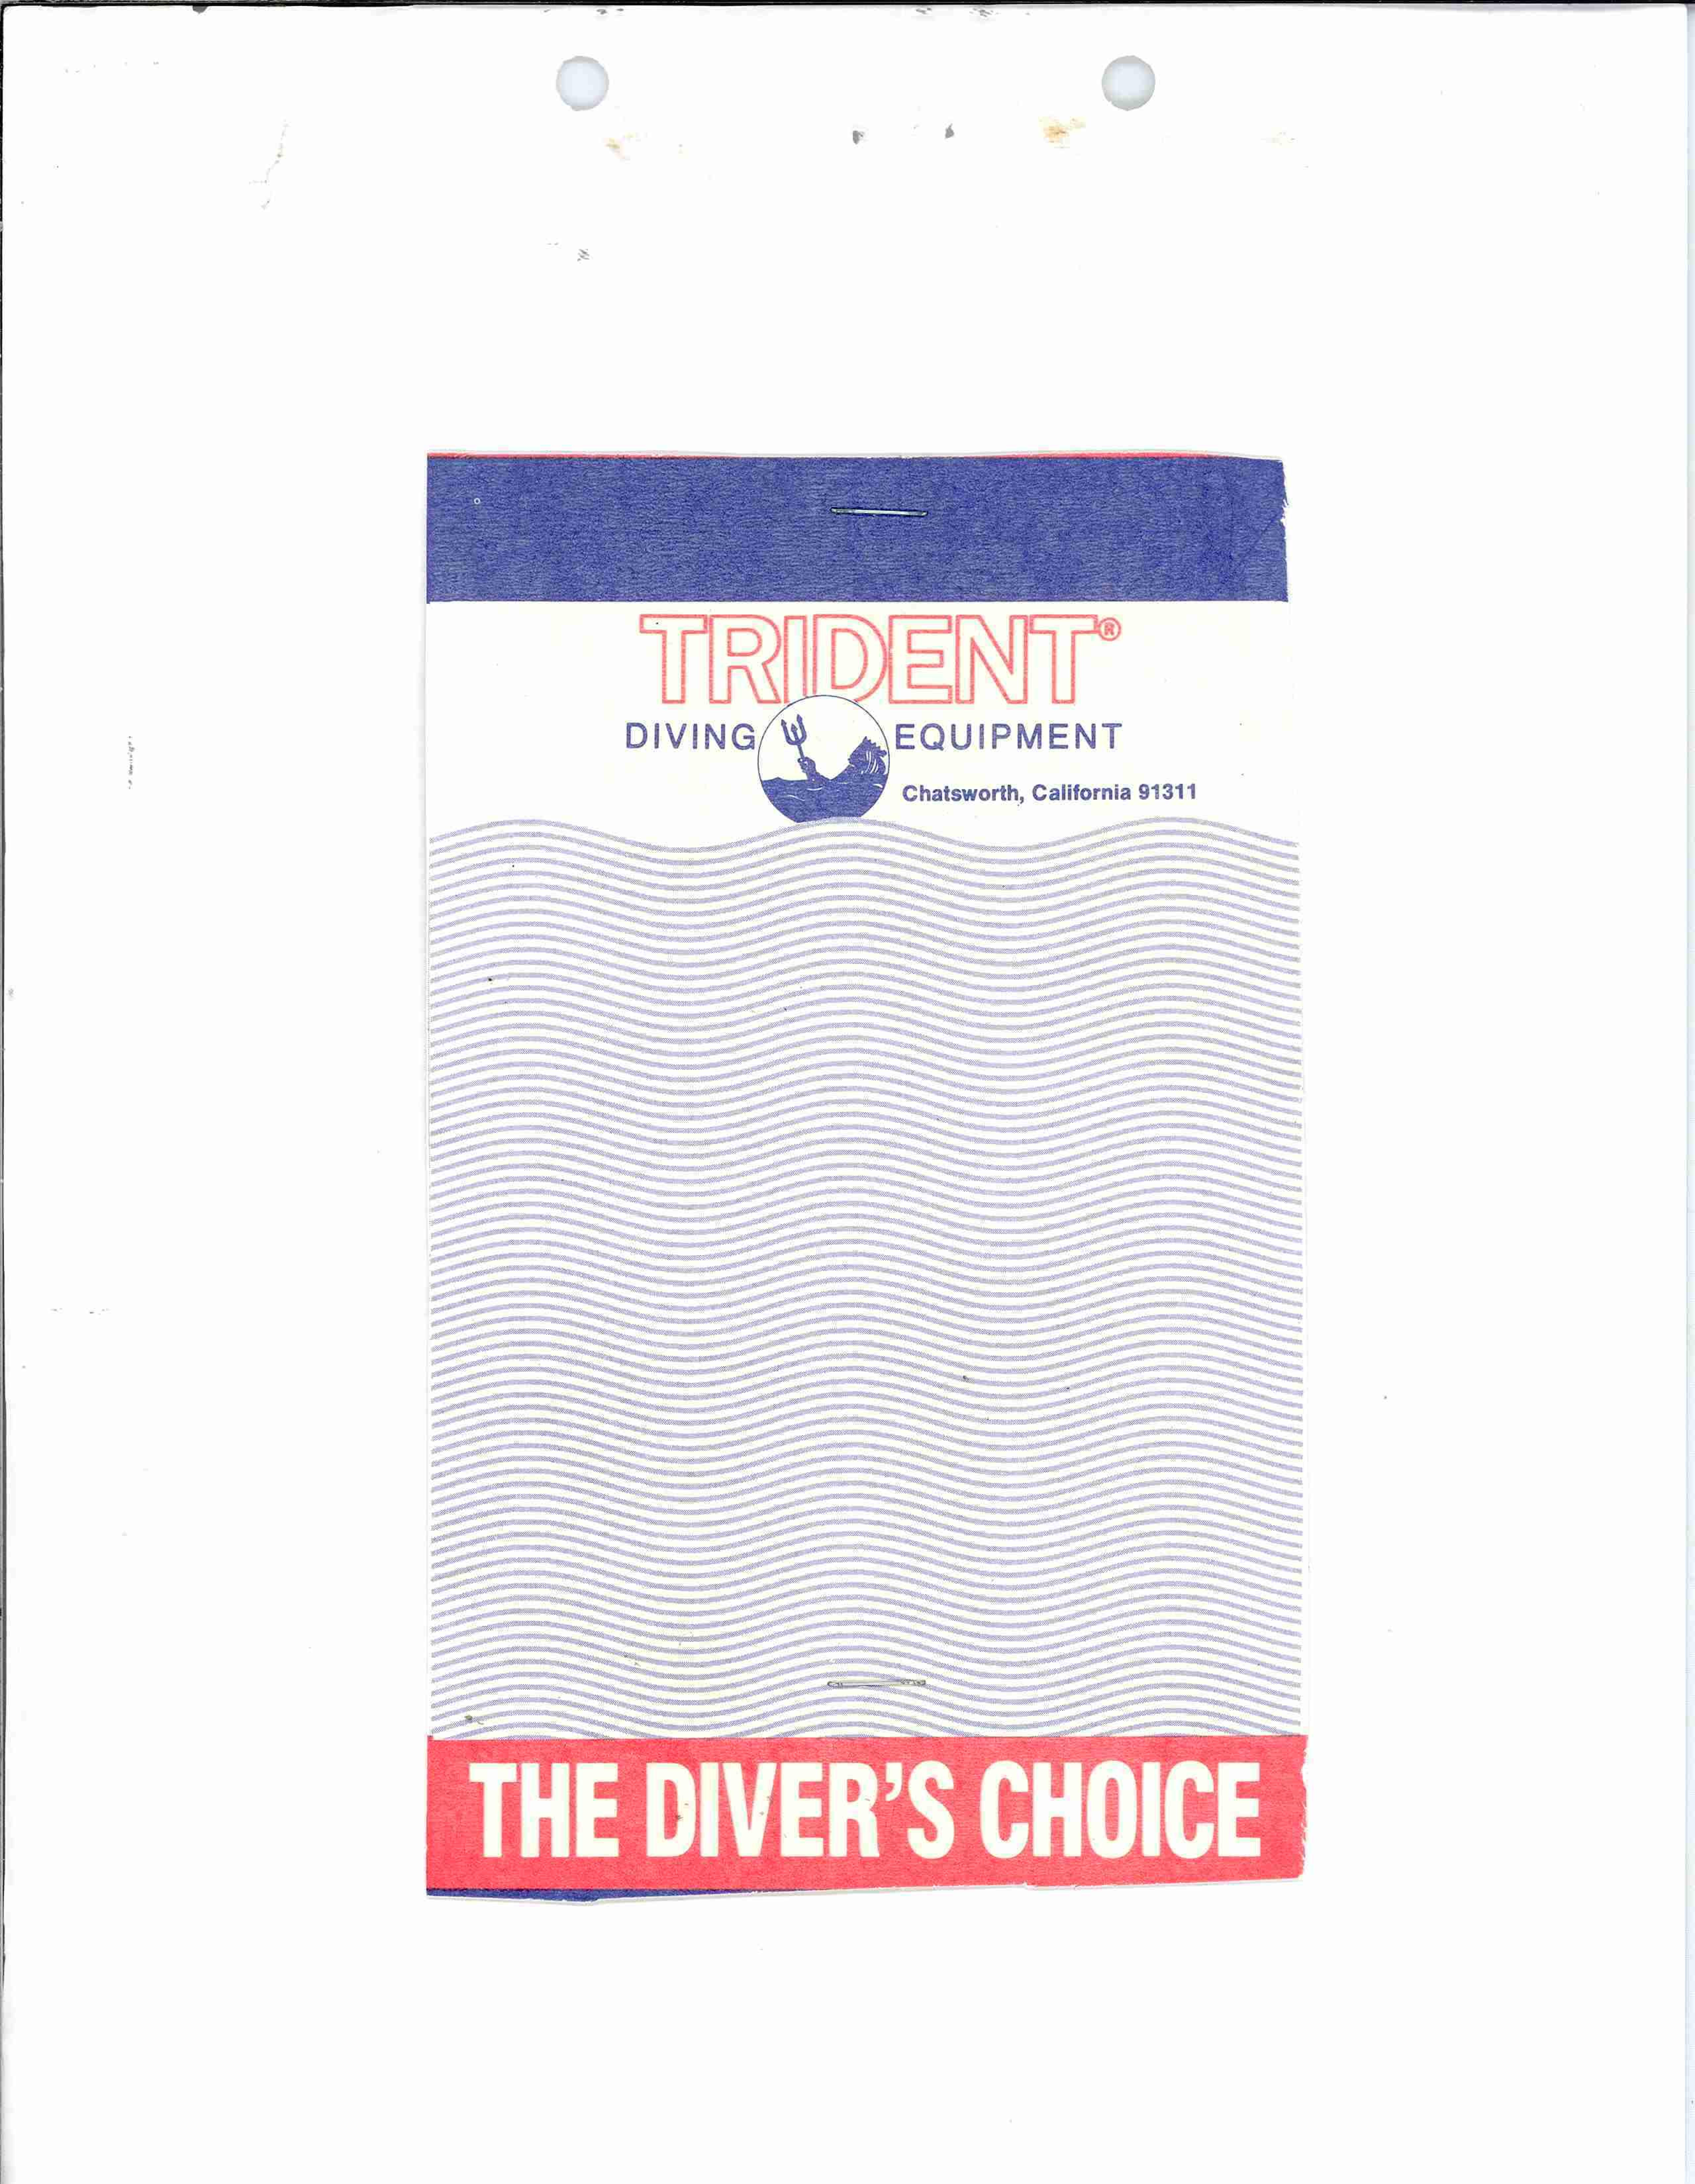 THE DIVER'S CHOICE